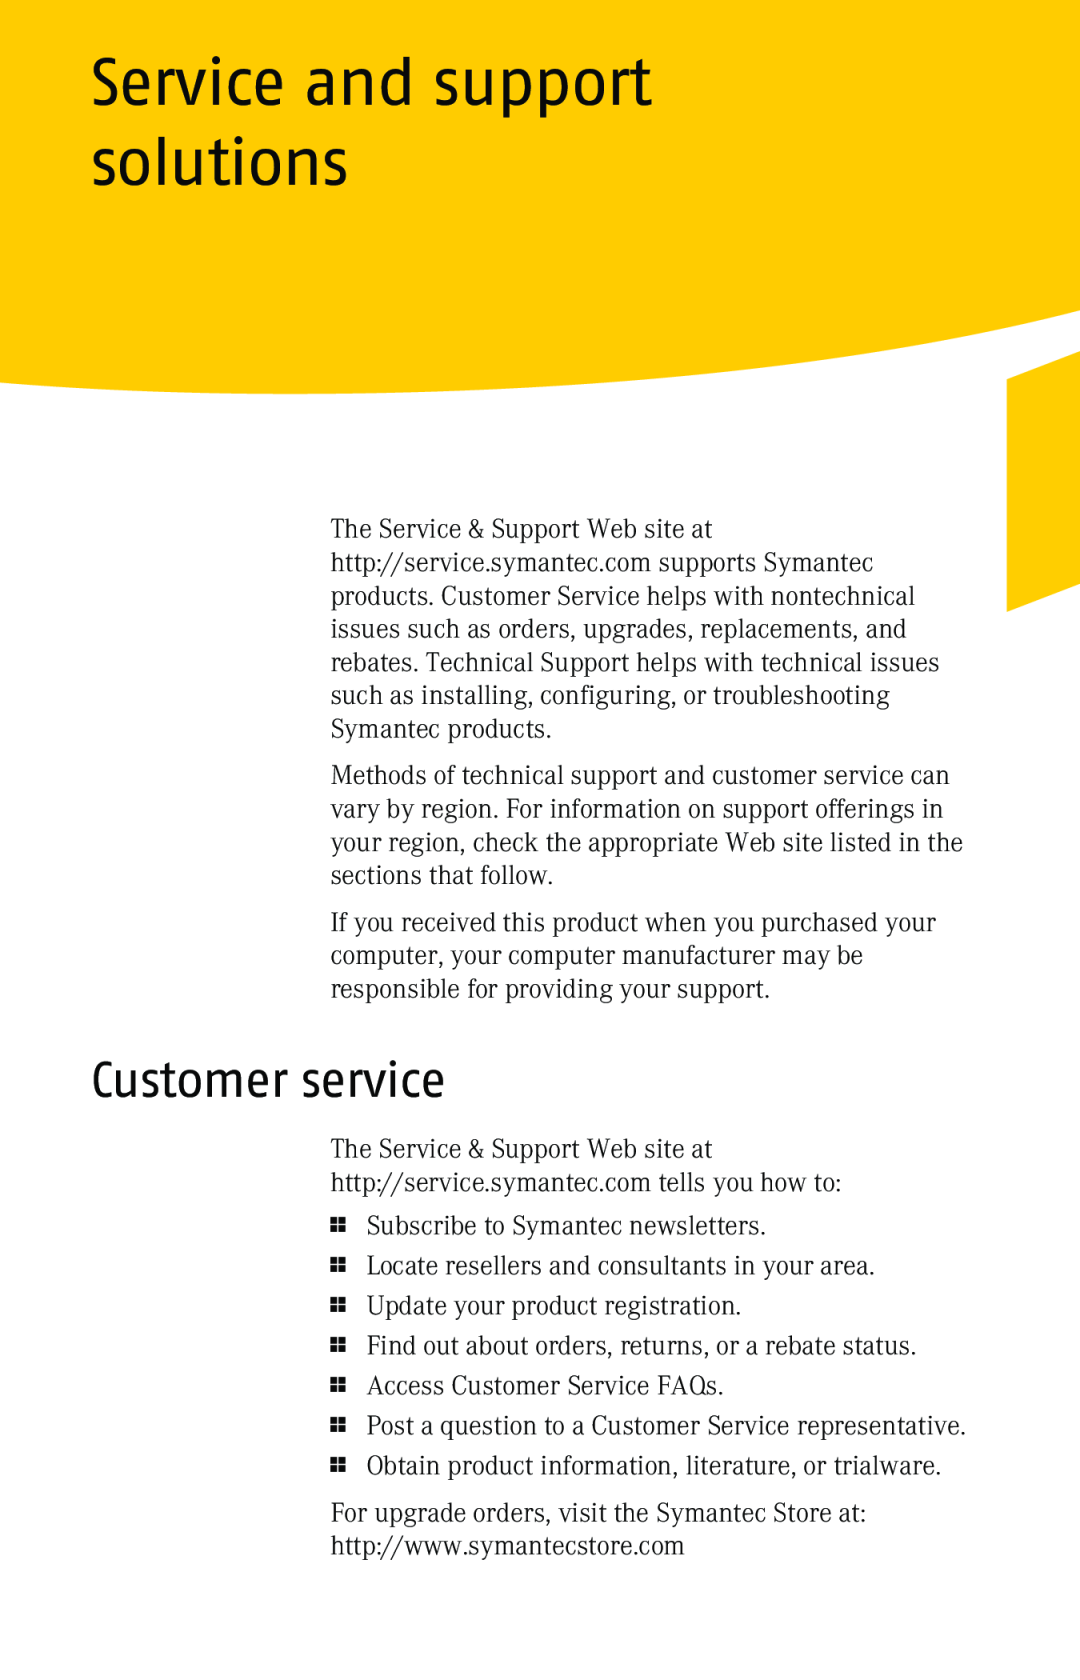 Symantec 10 manual Service and support solutions, Customer service 